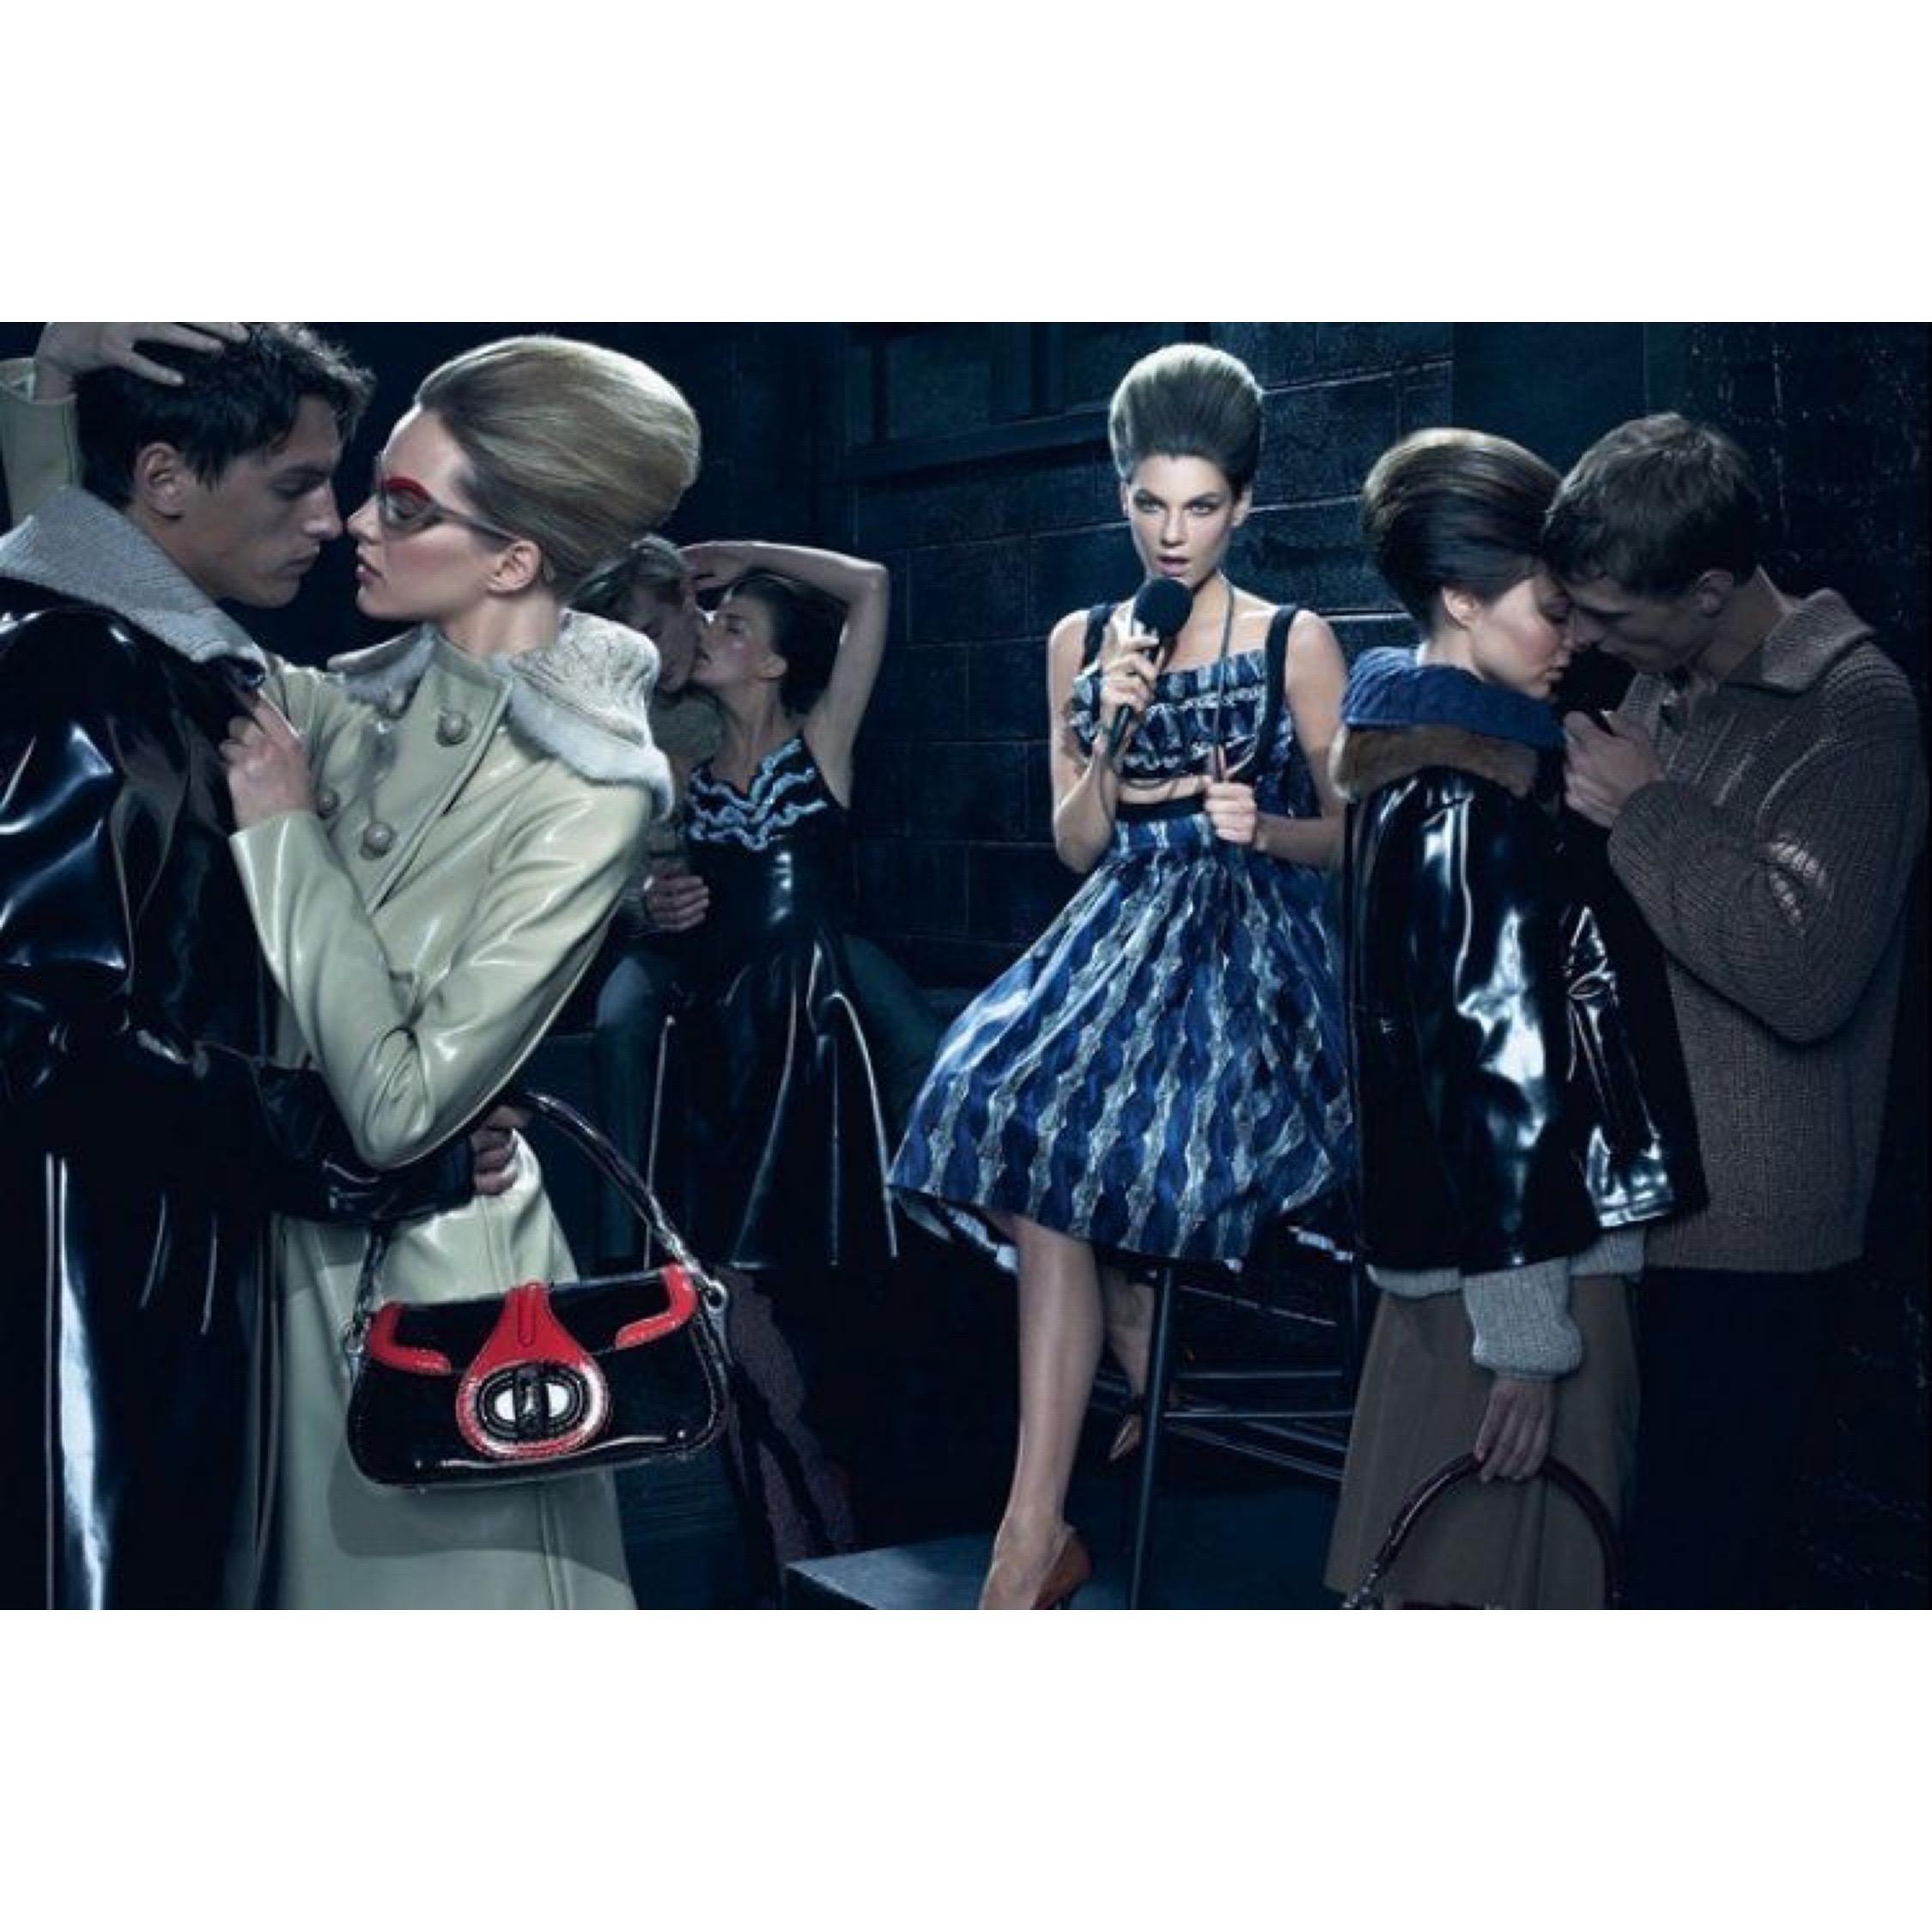 Fashion is about revision and remixing just as much as it is about novelty and innovation. Season after season, Prada consistently captures both of these key elements. By accentuating the feminine form with reimaged designs of what is classically